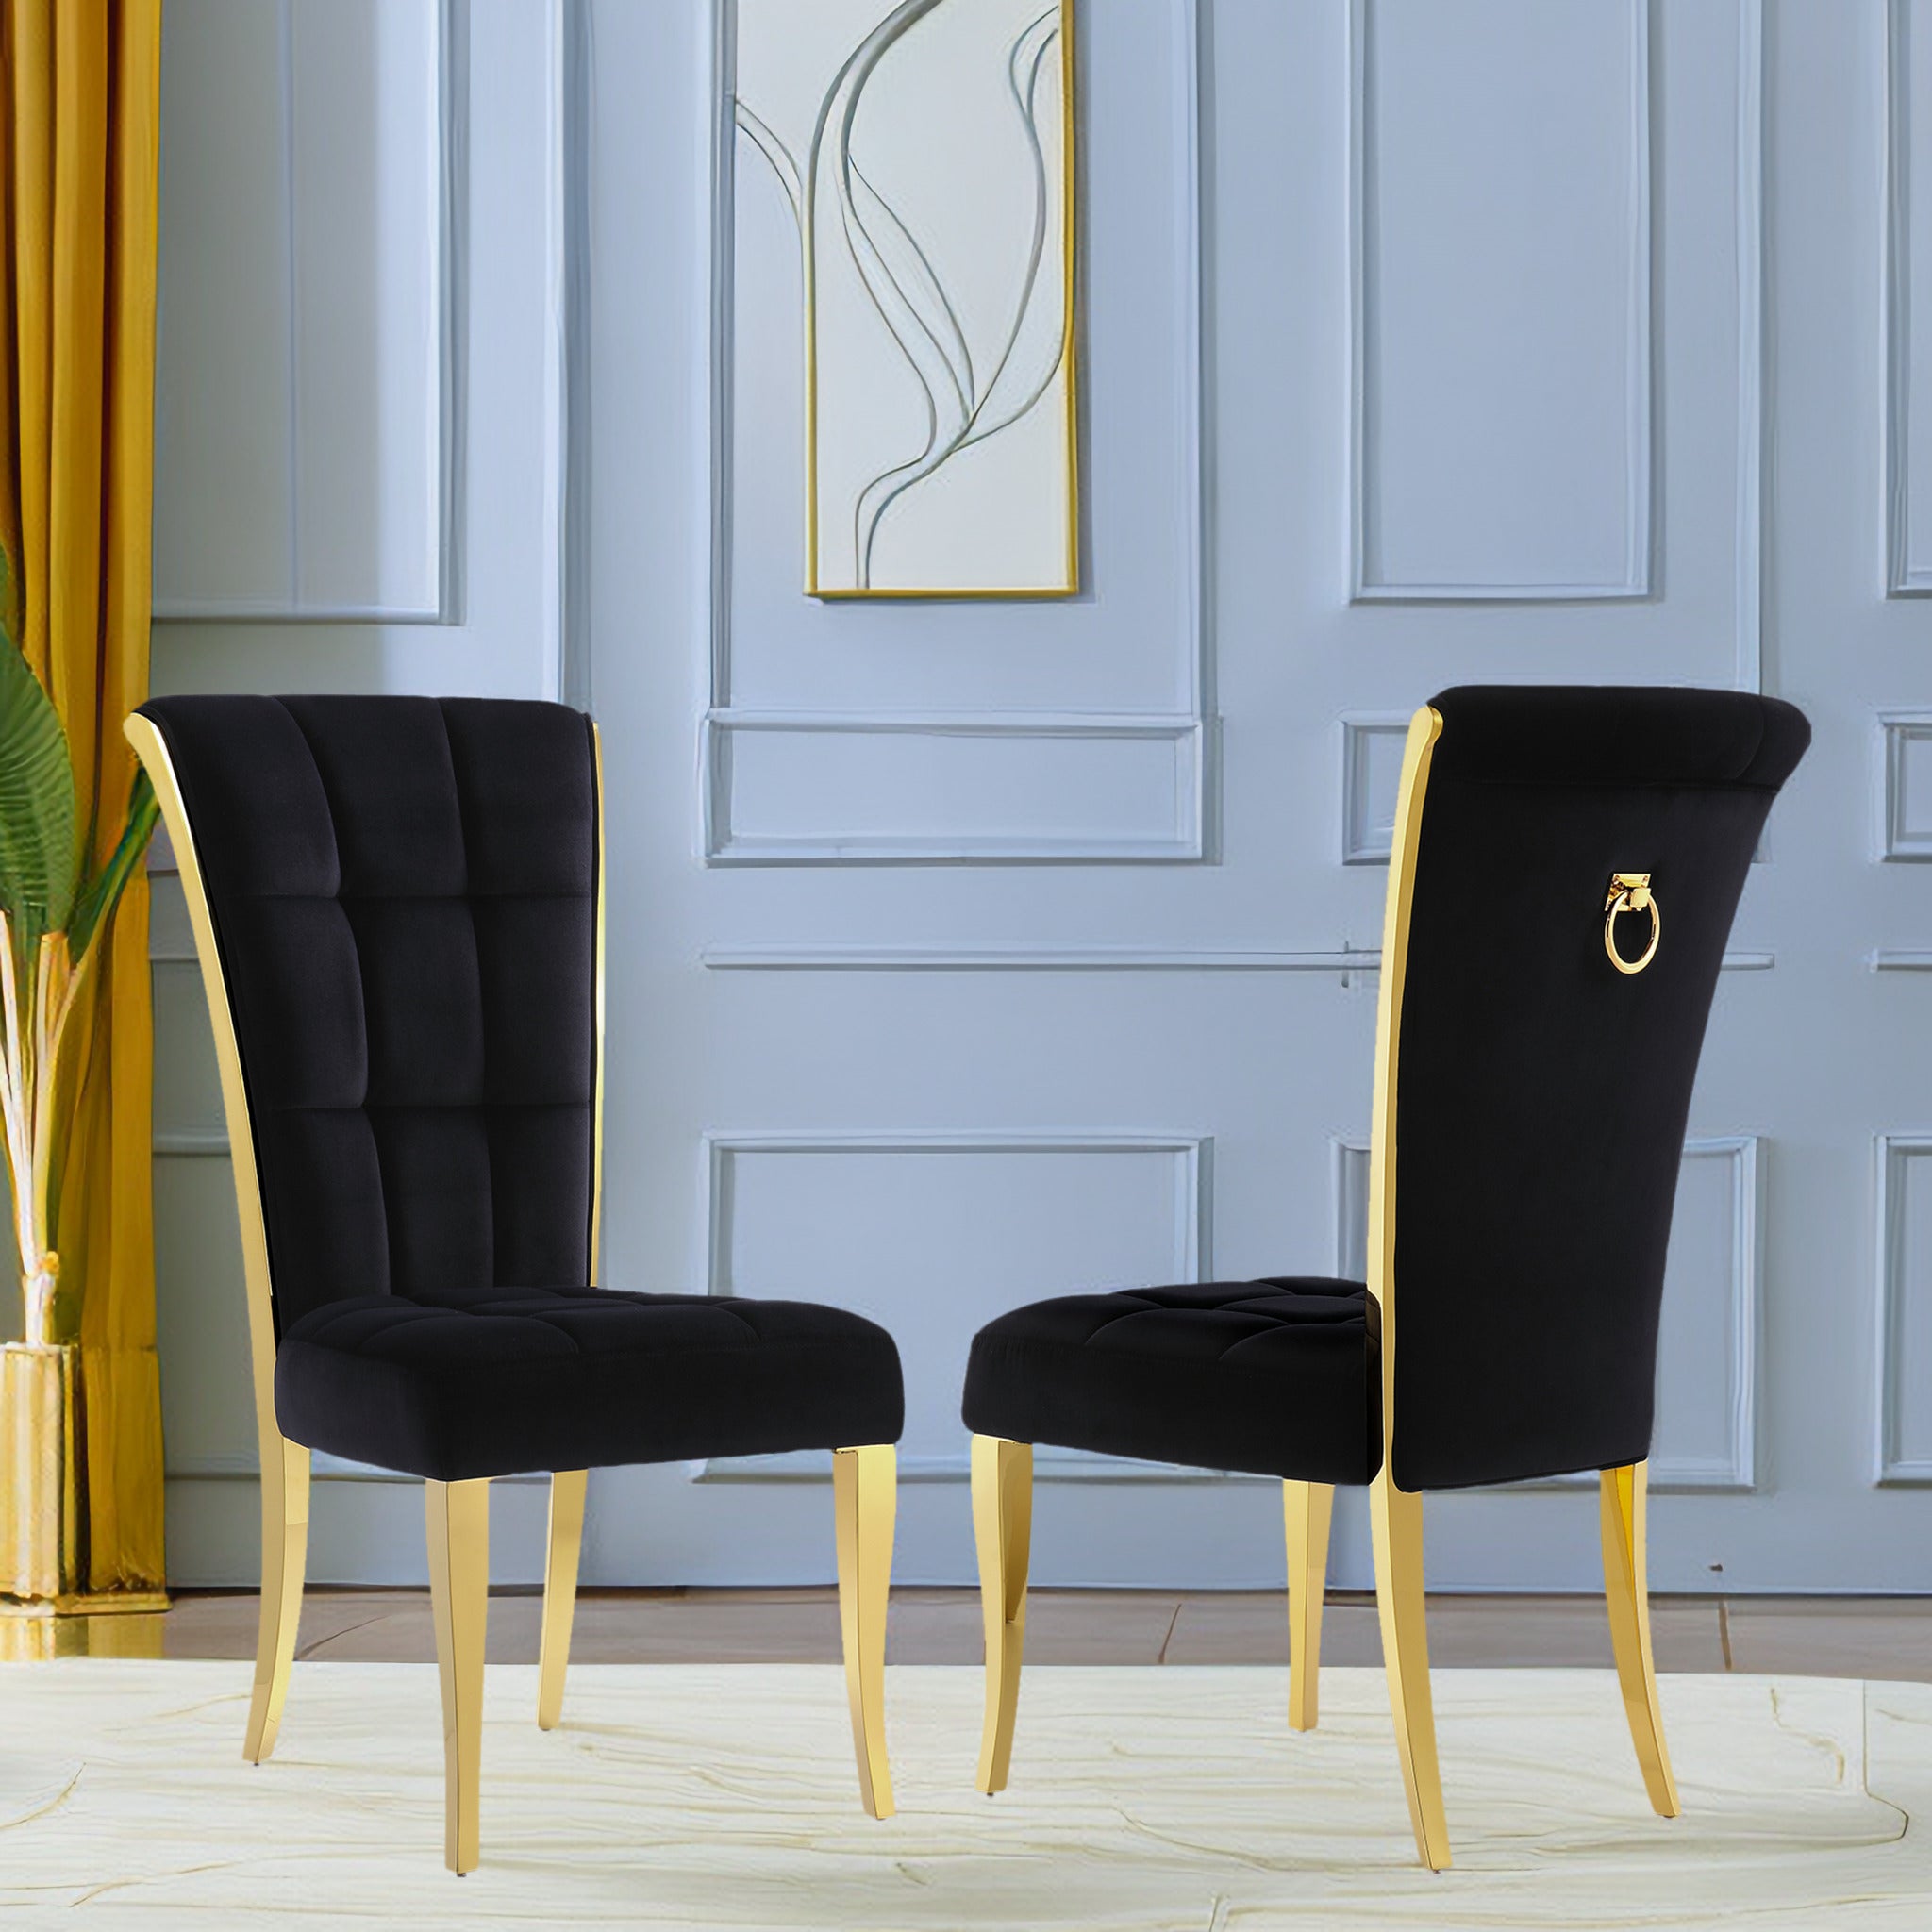 Elevate Your Dining Experience with AUZ's Black Gold Chairs